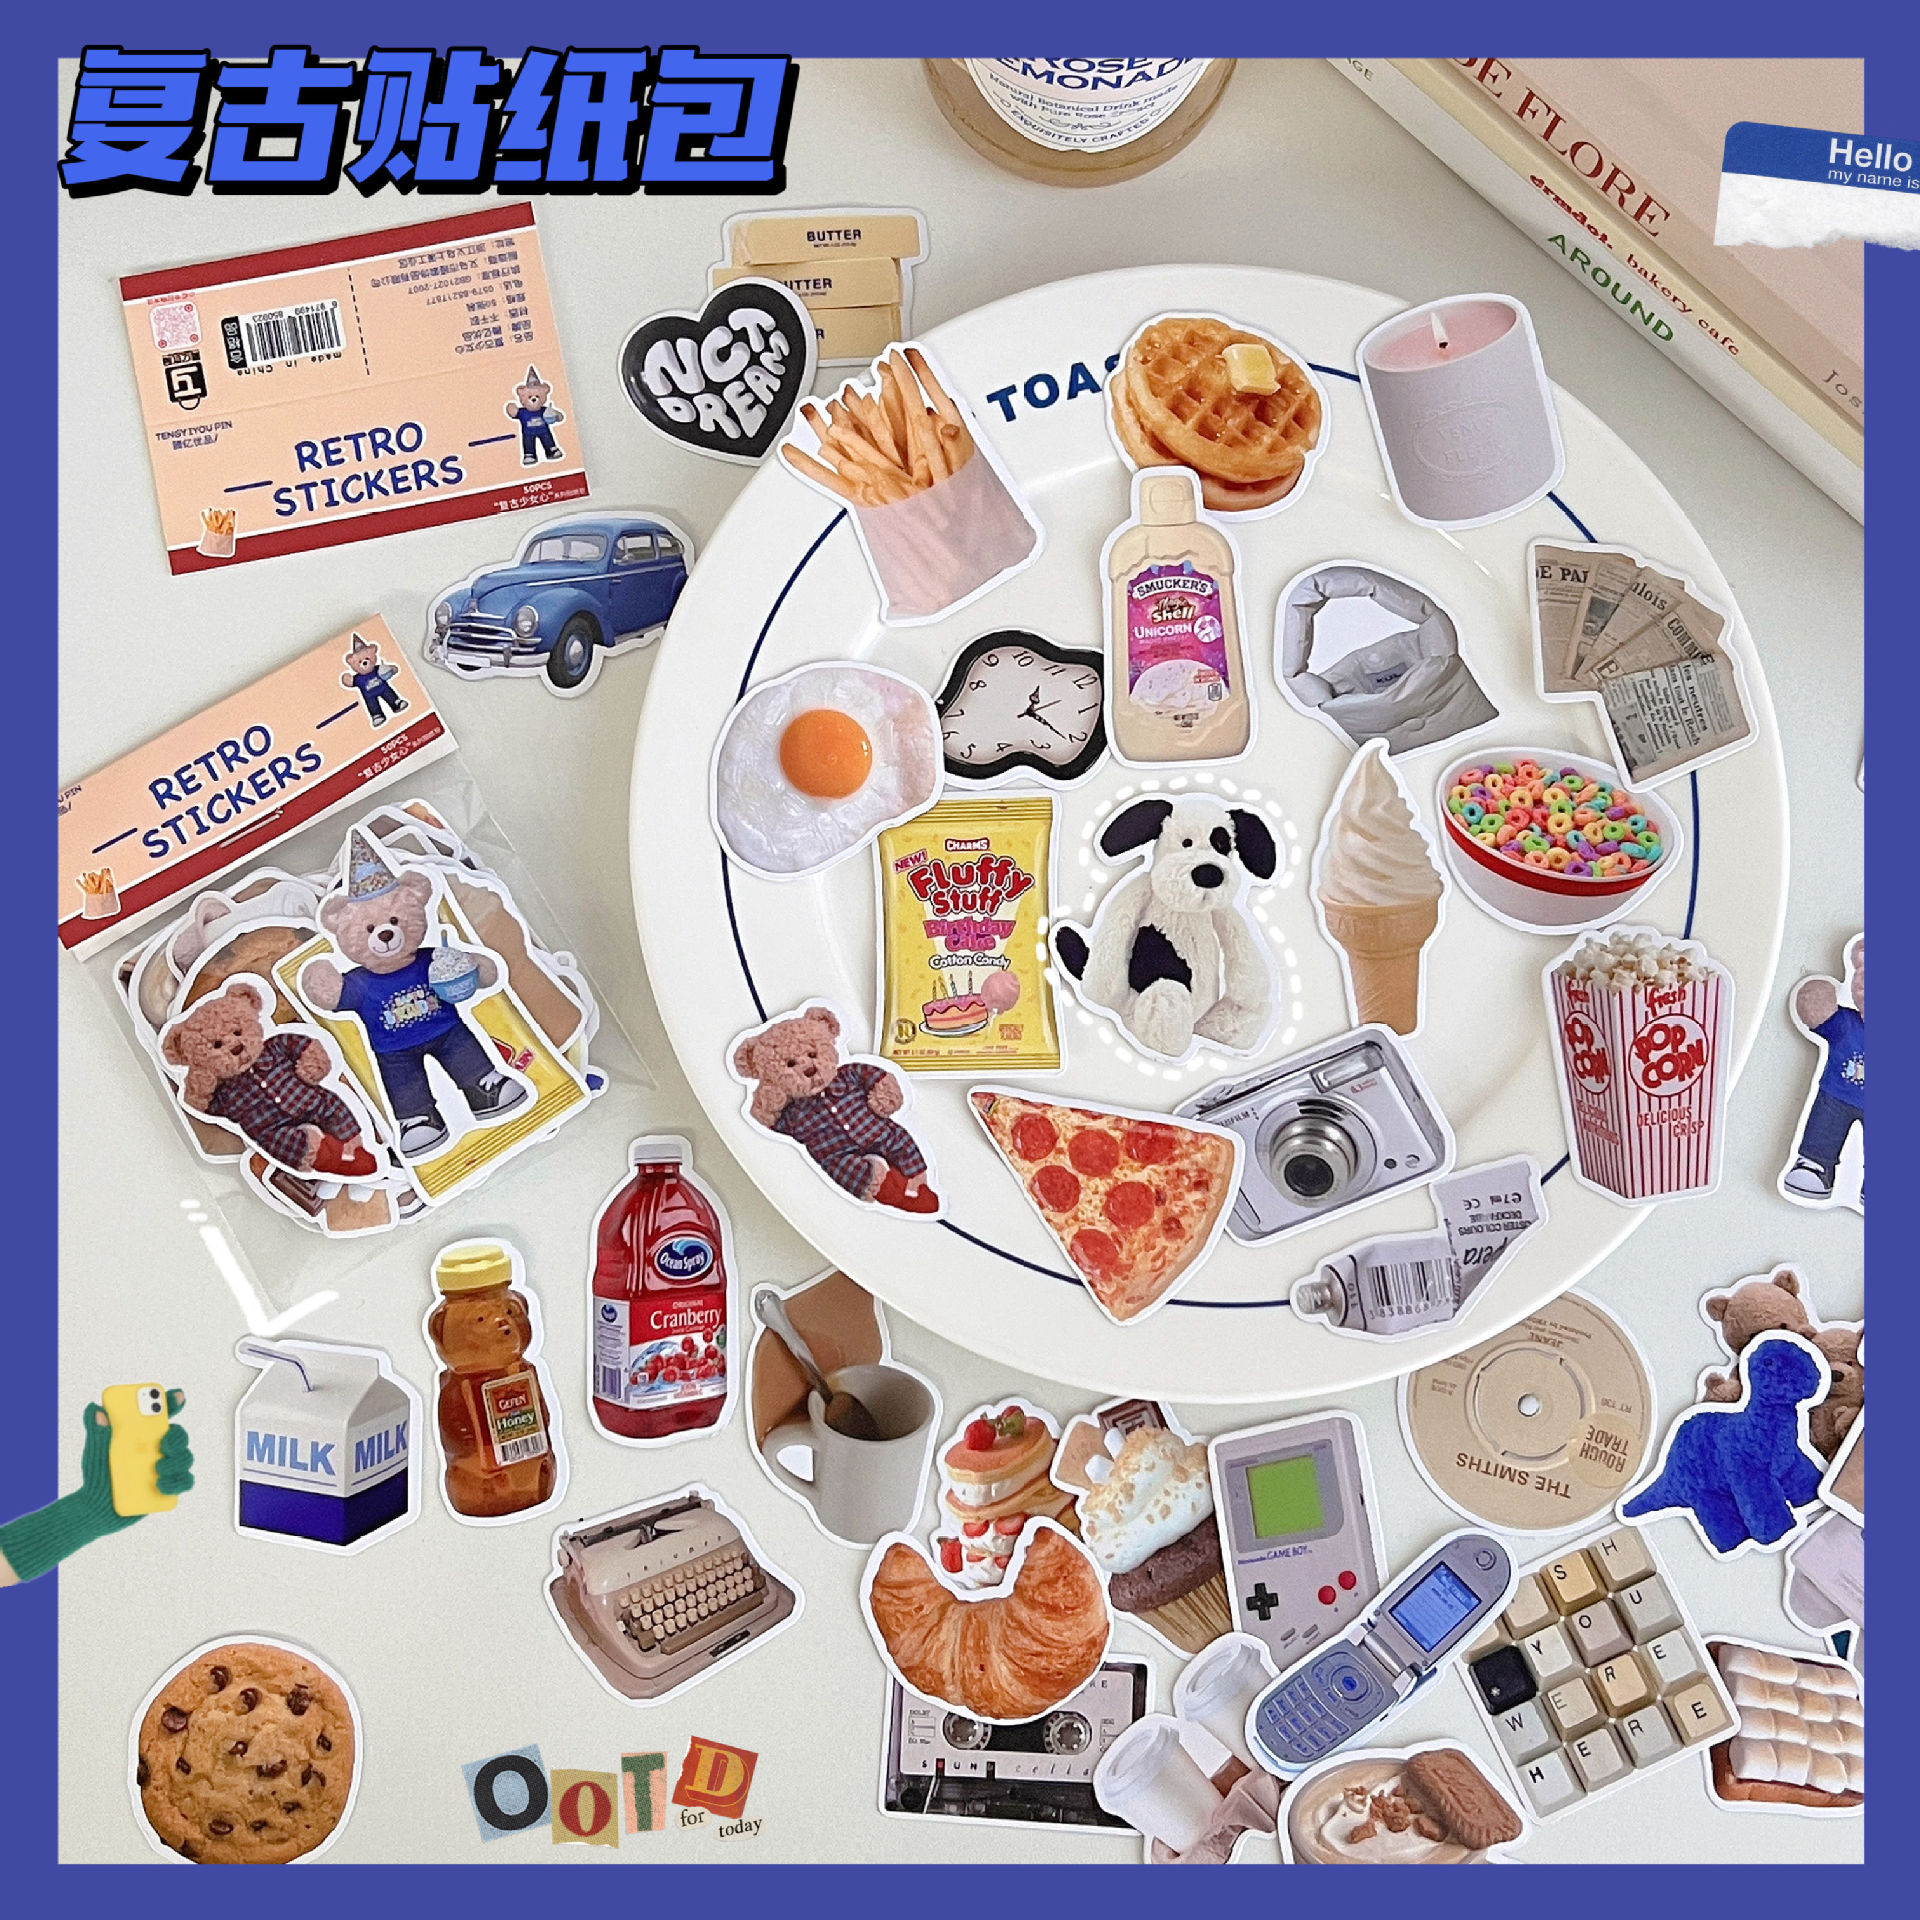 50 Simple Stickers Ins Style Food Dessert Hand Account Mobile Phone Laptop iPad Decorative Waterproof Stickers